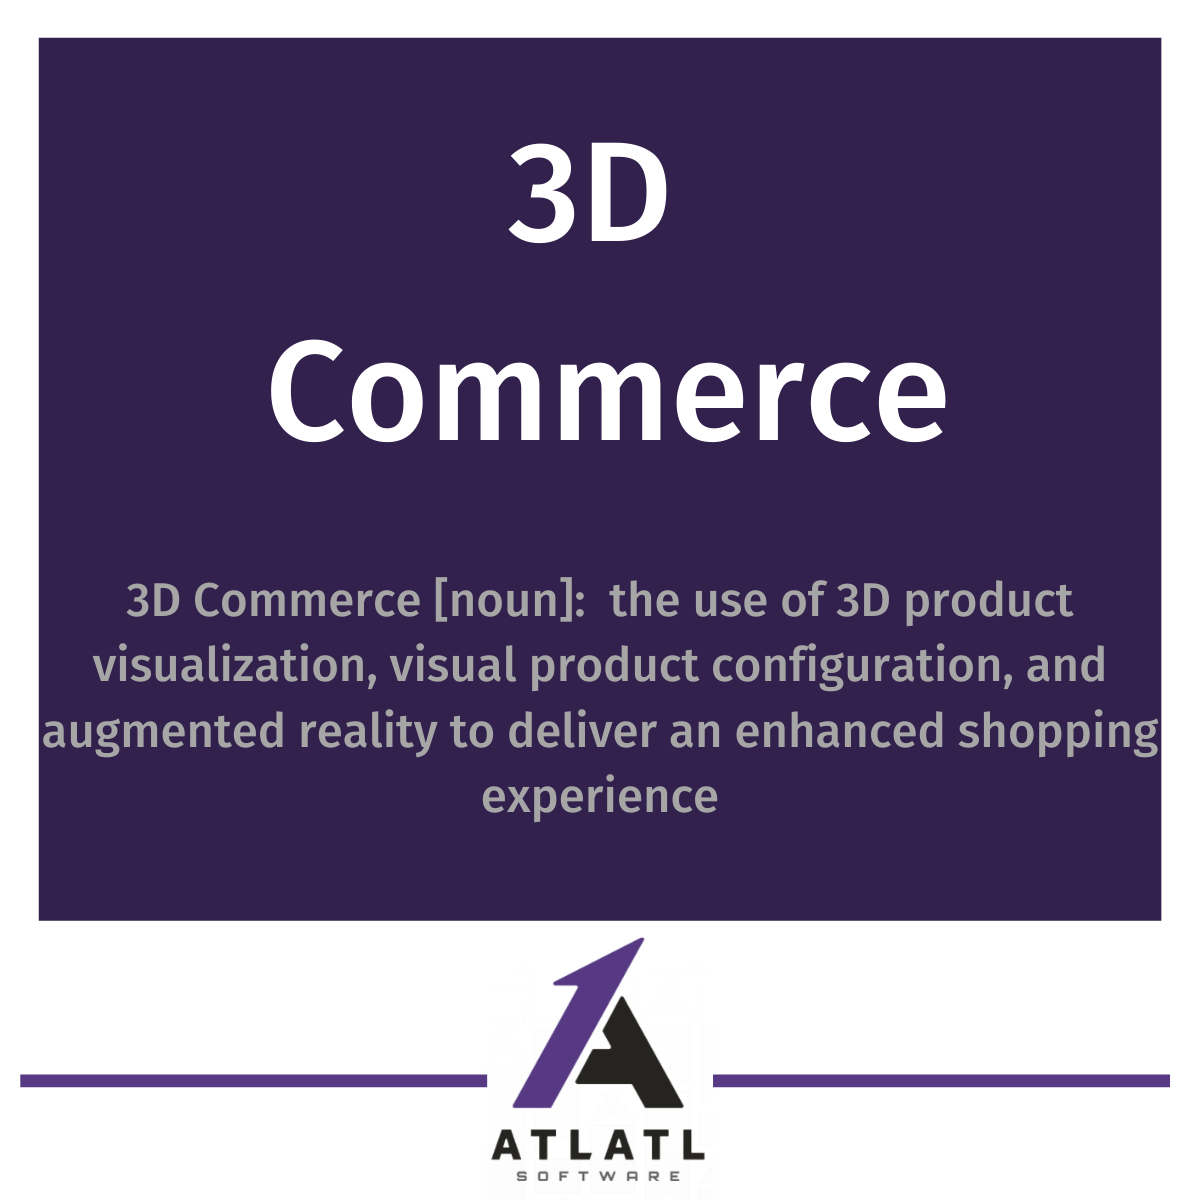 What is 3D commerce?